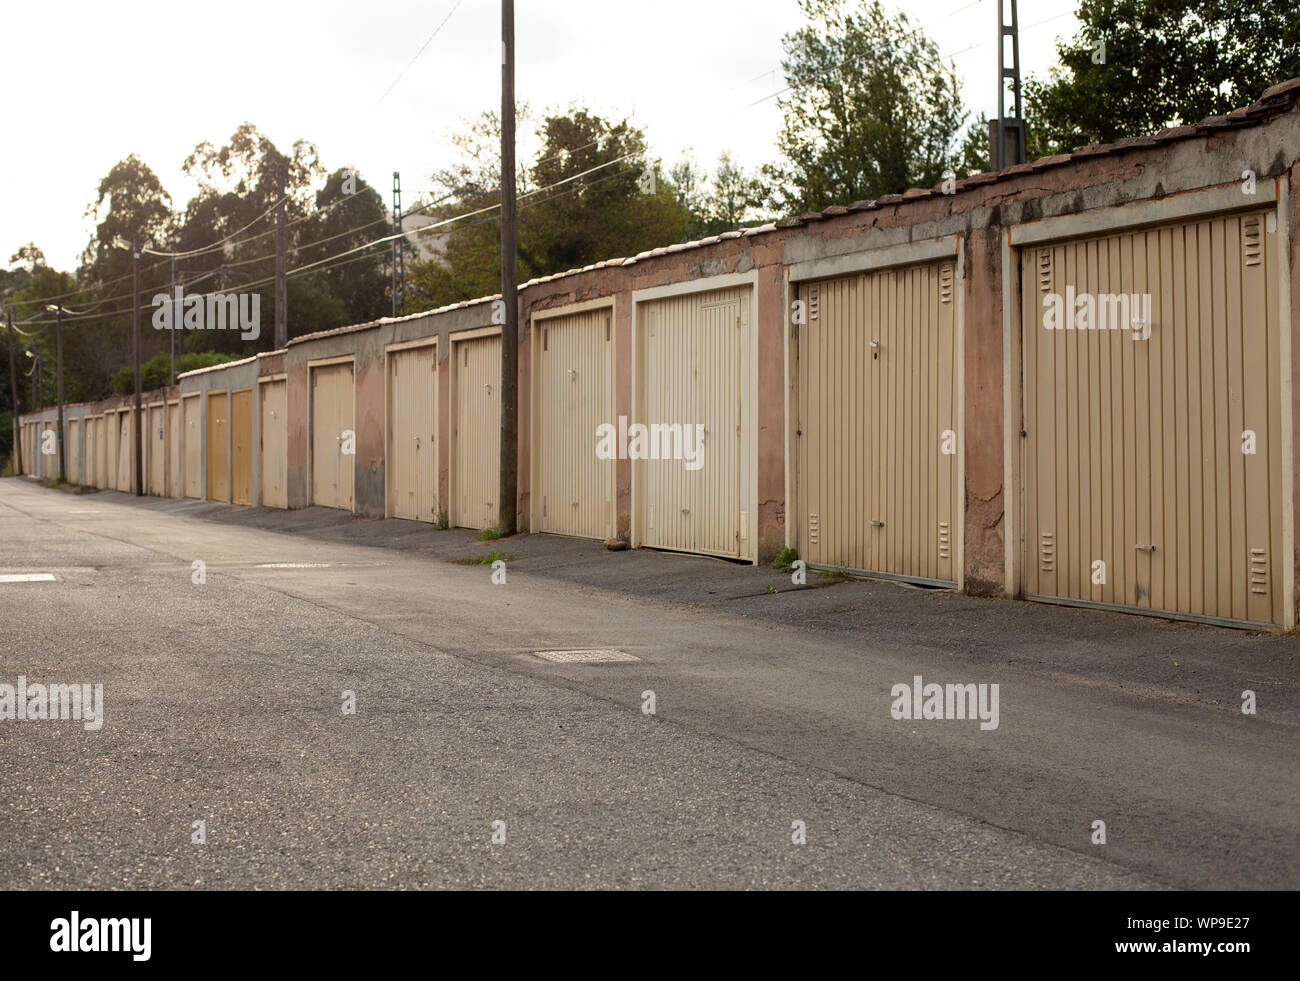 Row of old garages at daytime Stock Photo